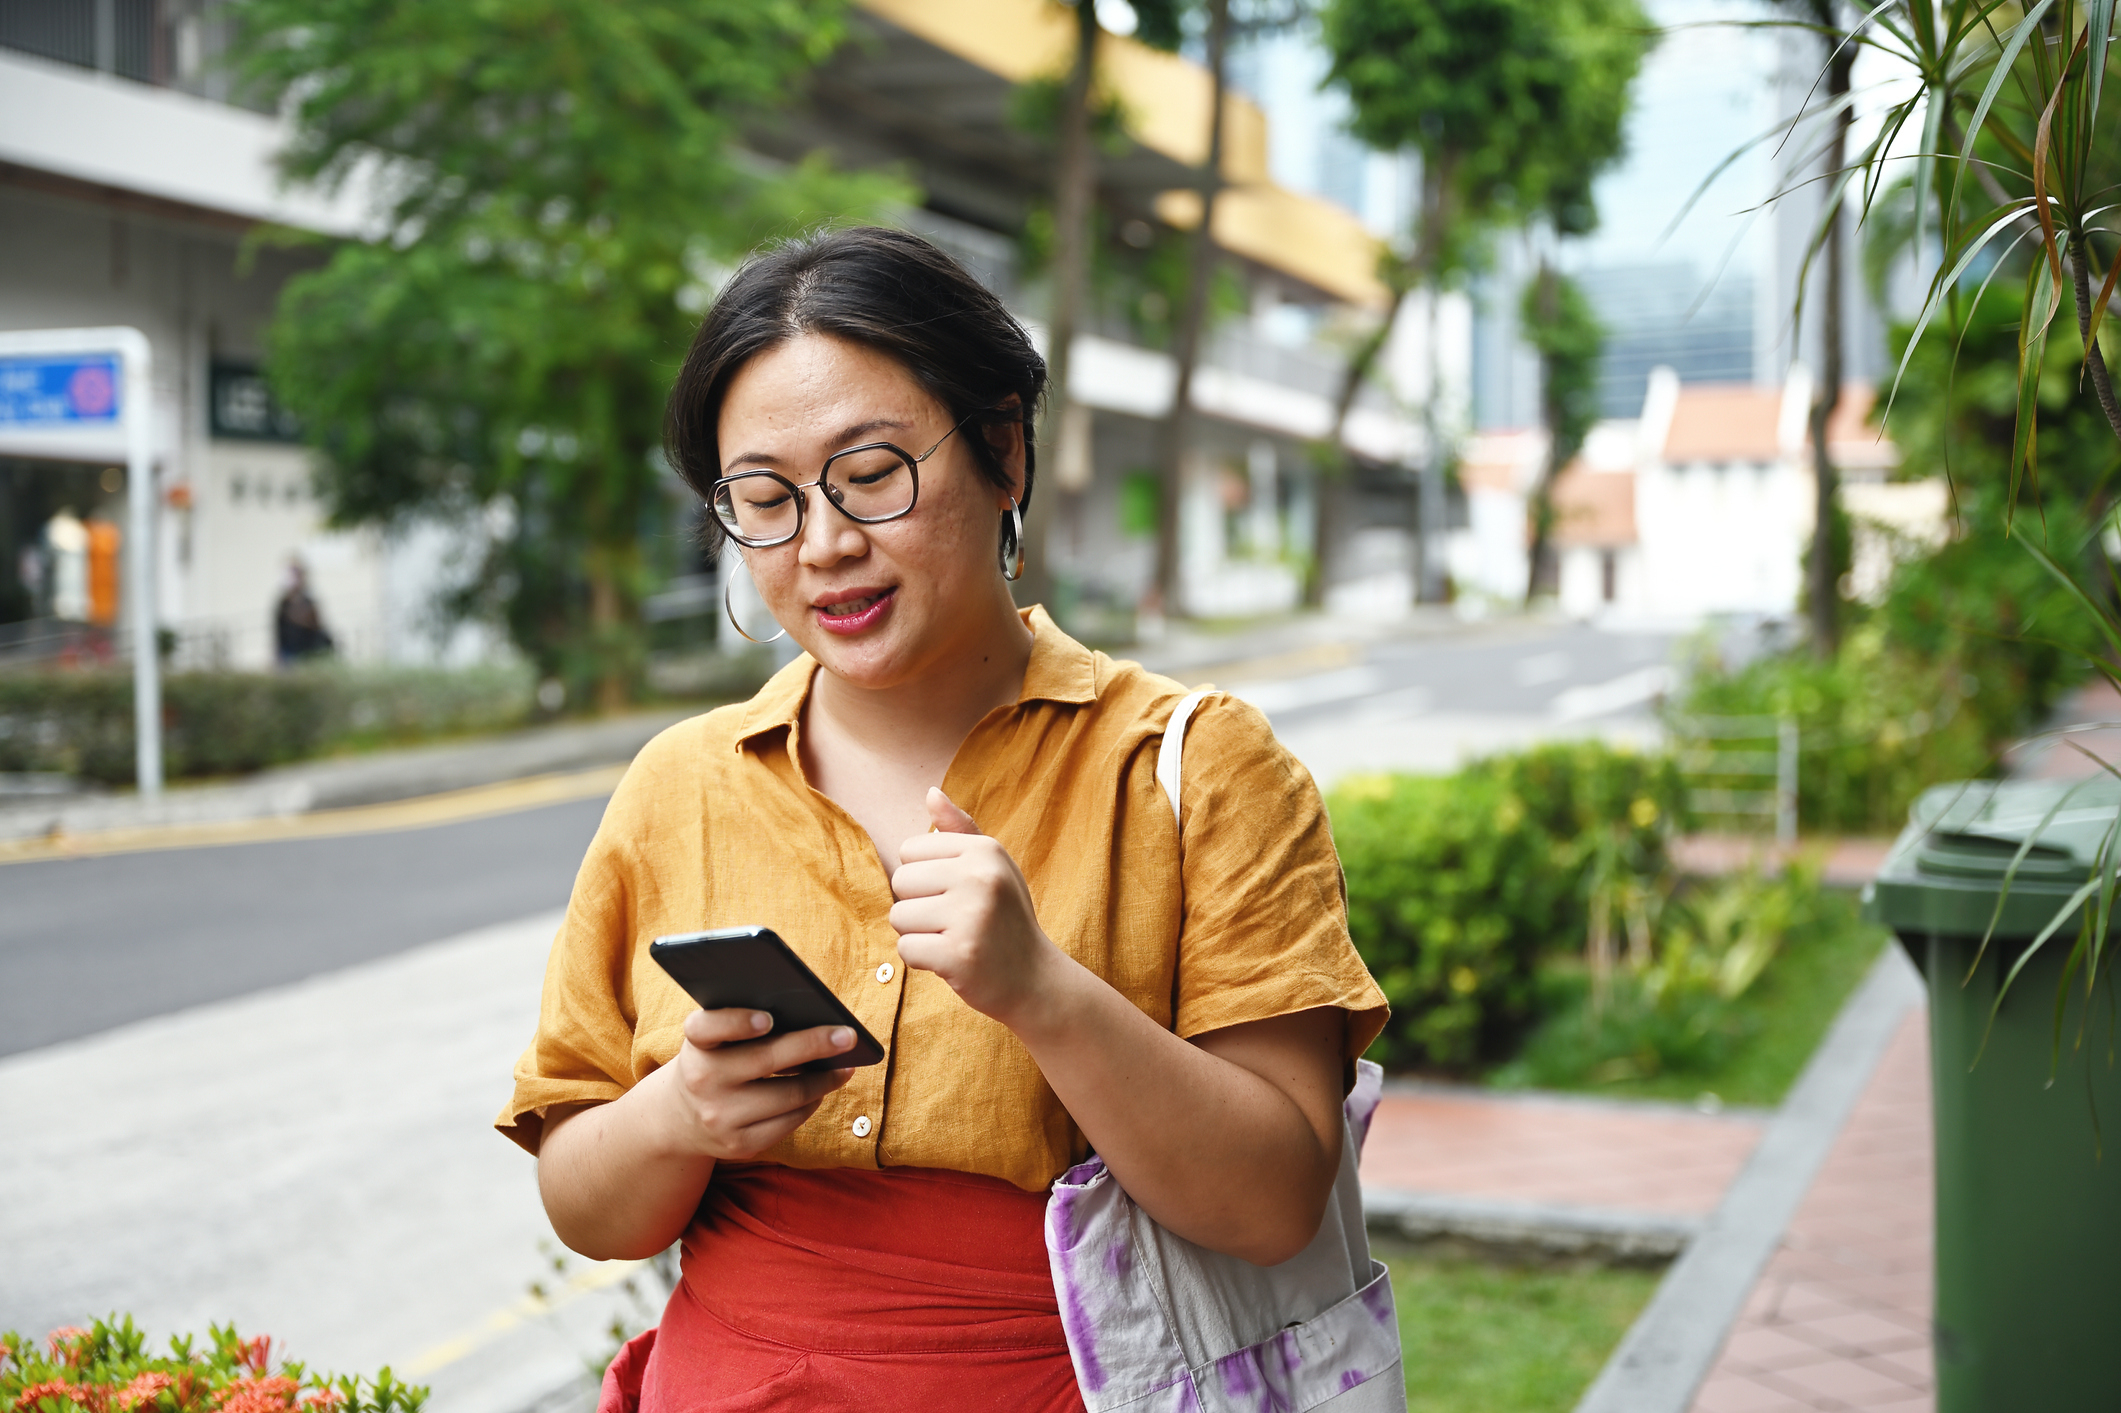 Woman in glasses using phone, carrying a bag, standing on a sidewalk